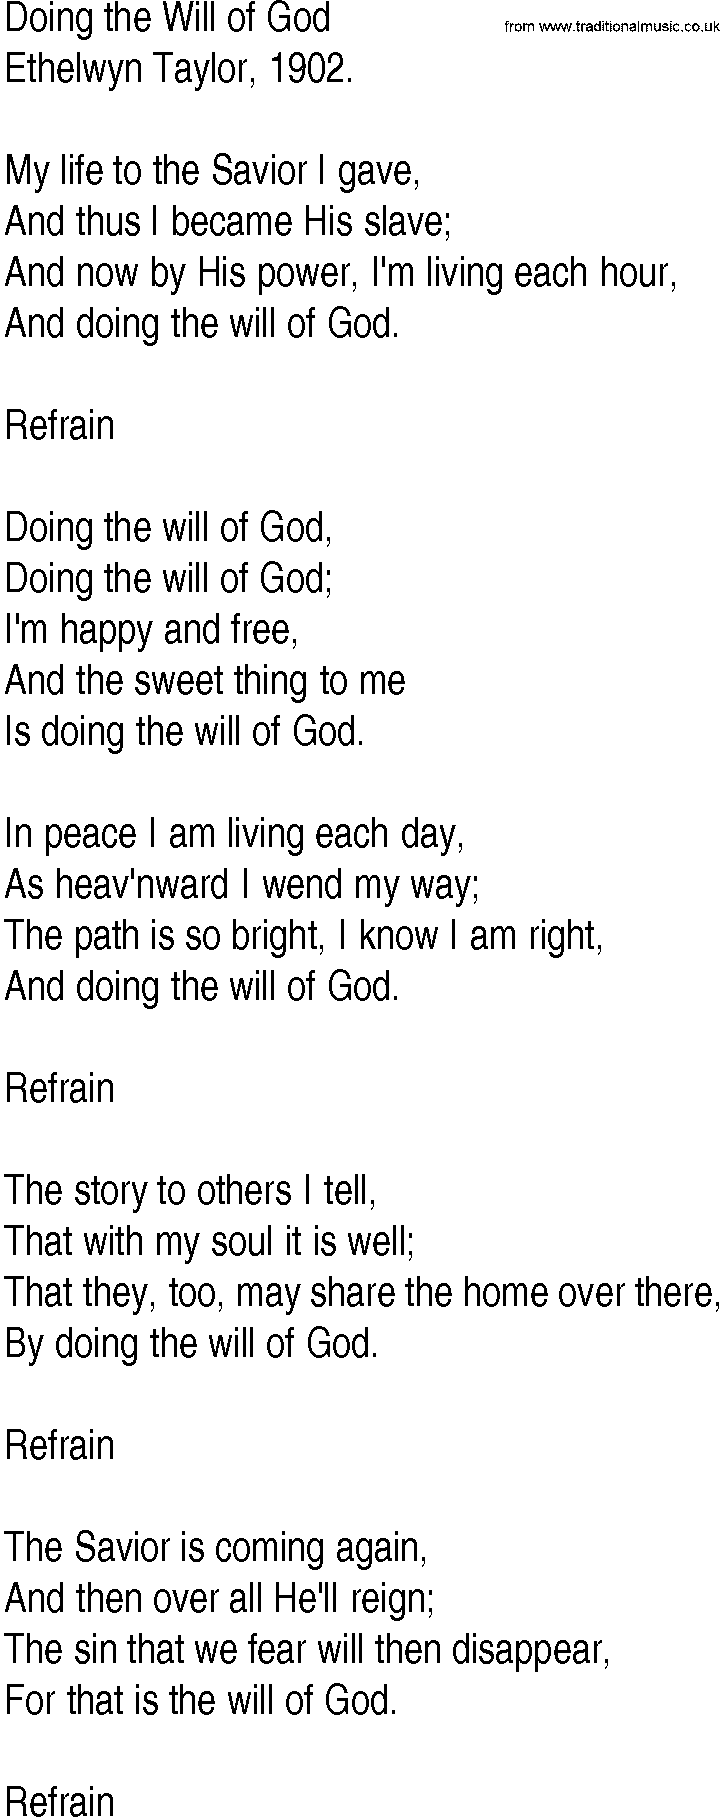 Hymn and Gospel Song: Doing the Will of God by Ethelwyn Taylor lyrics